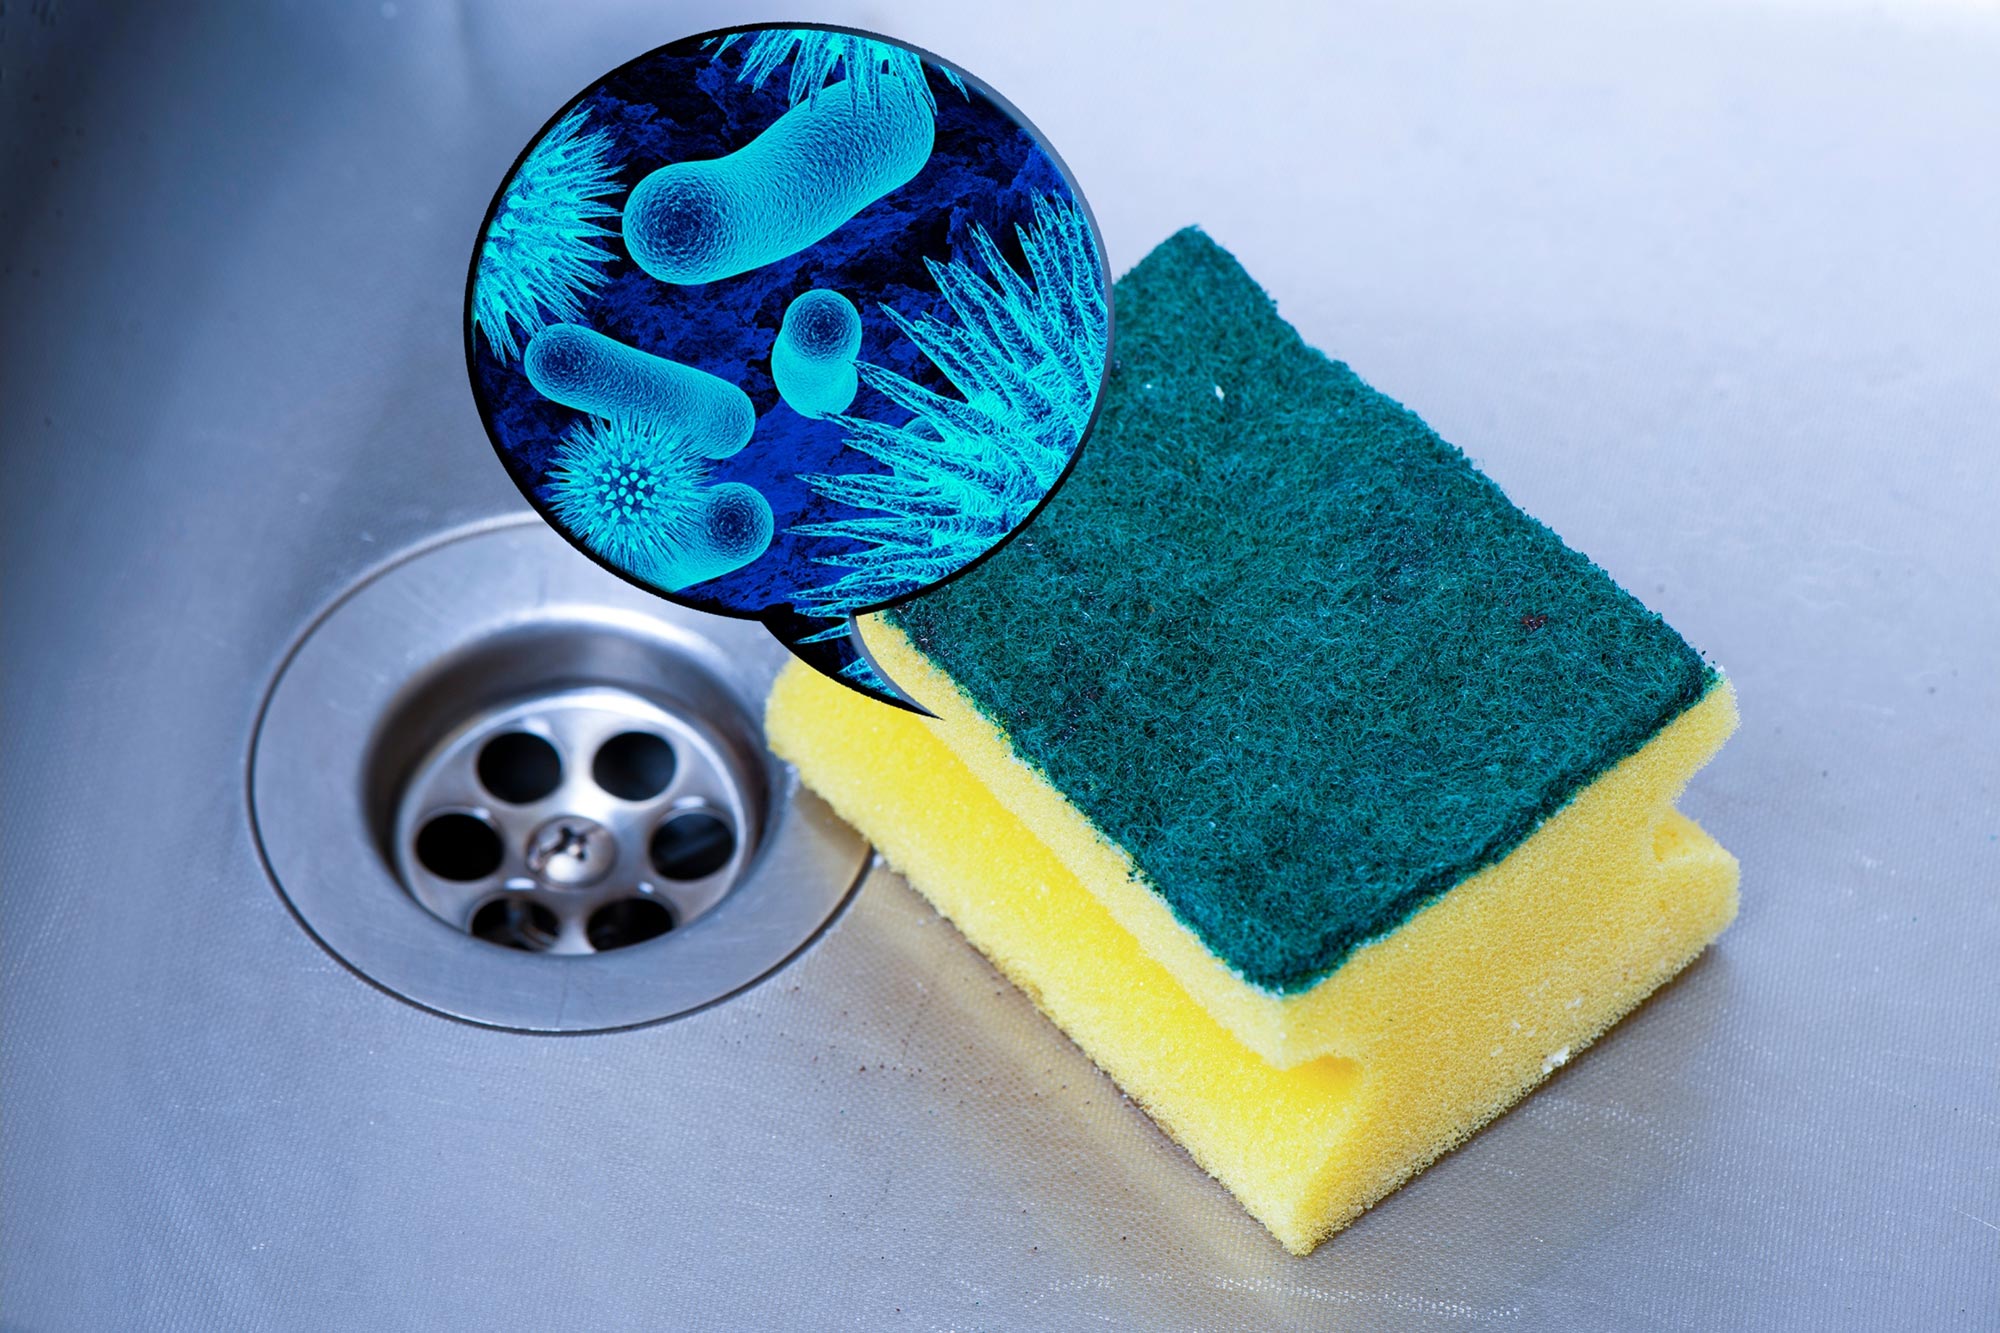 https://scitechdaily.com/images/Dirty-Kitchen-Sponge-Bacteria.jpg